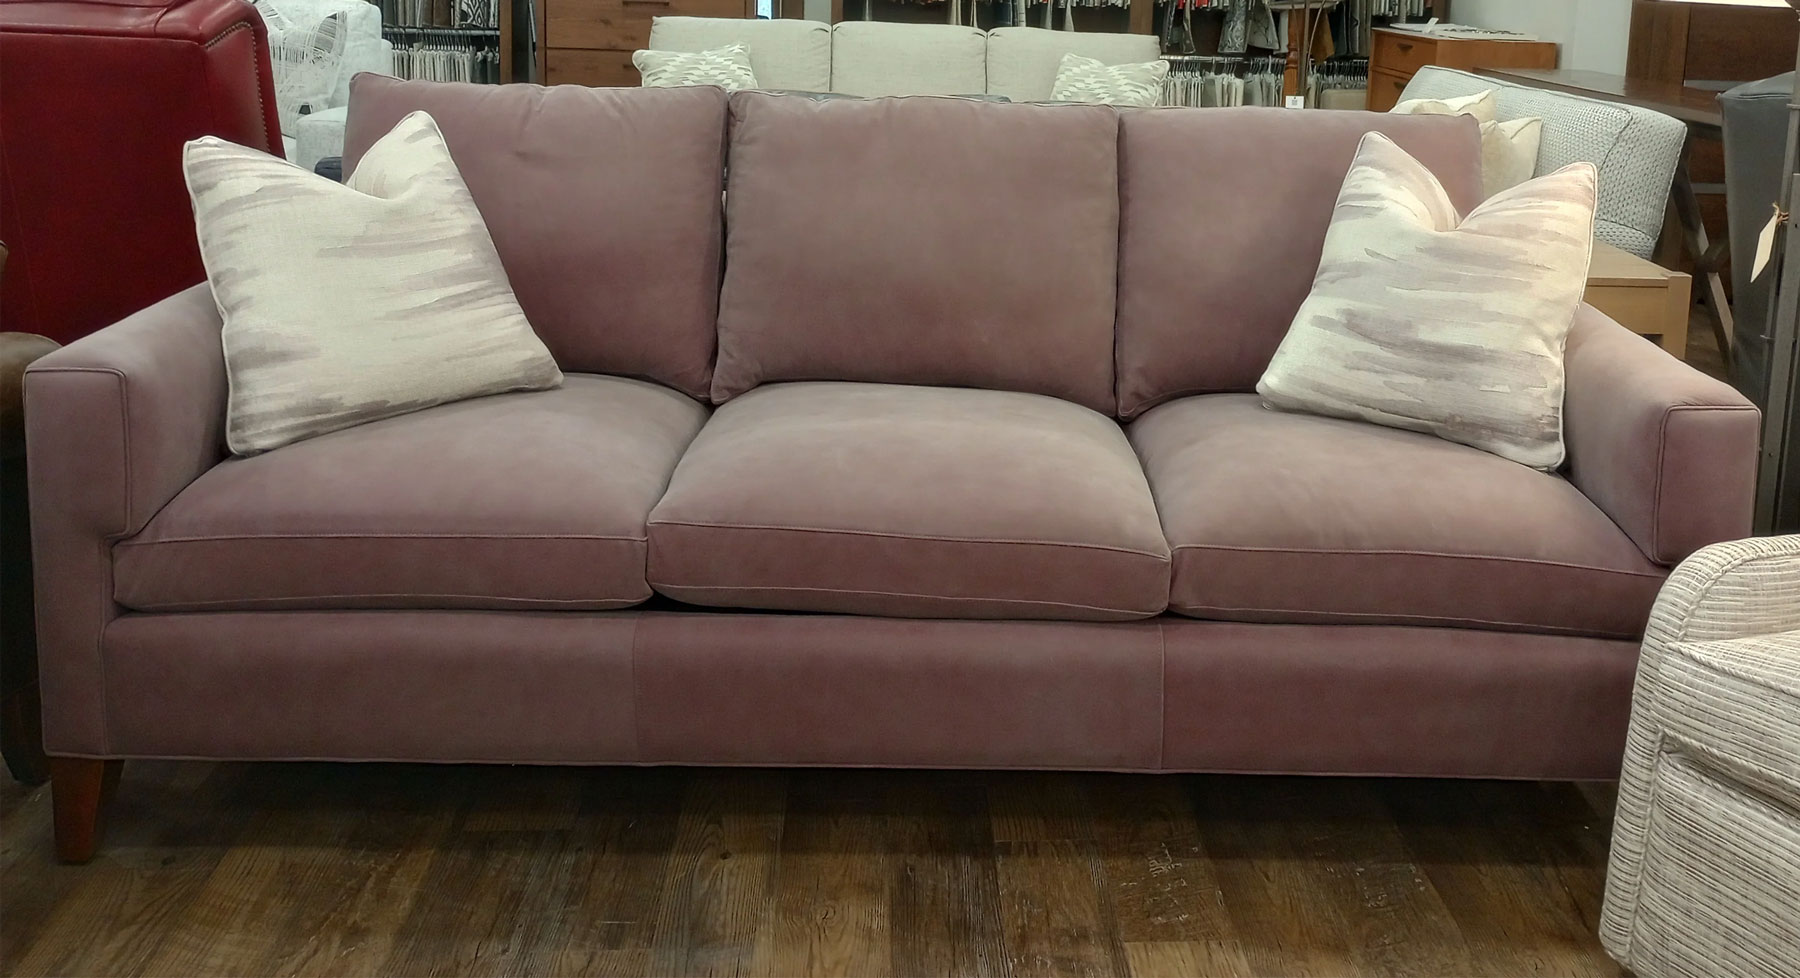 Our House 592-88 Piccadilly Sofa in Fumoso Plum Fabric